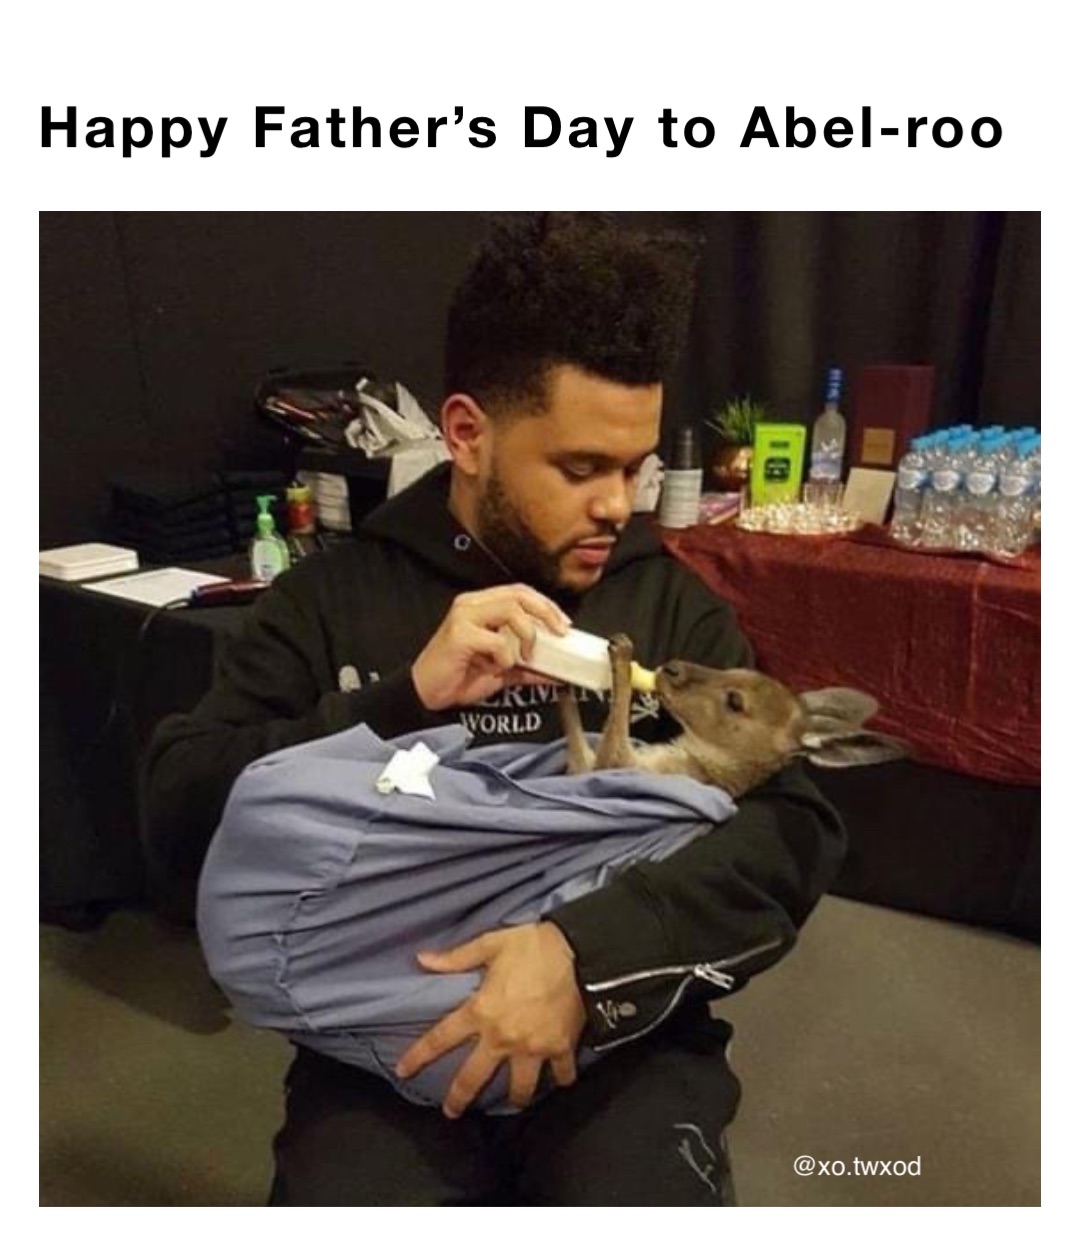 Happy Father’s Day to Abel-roo